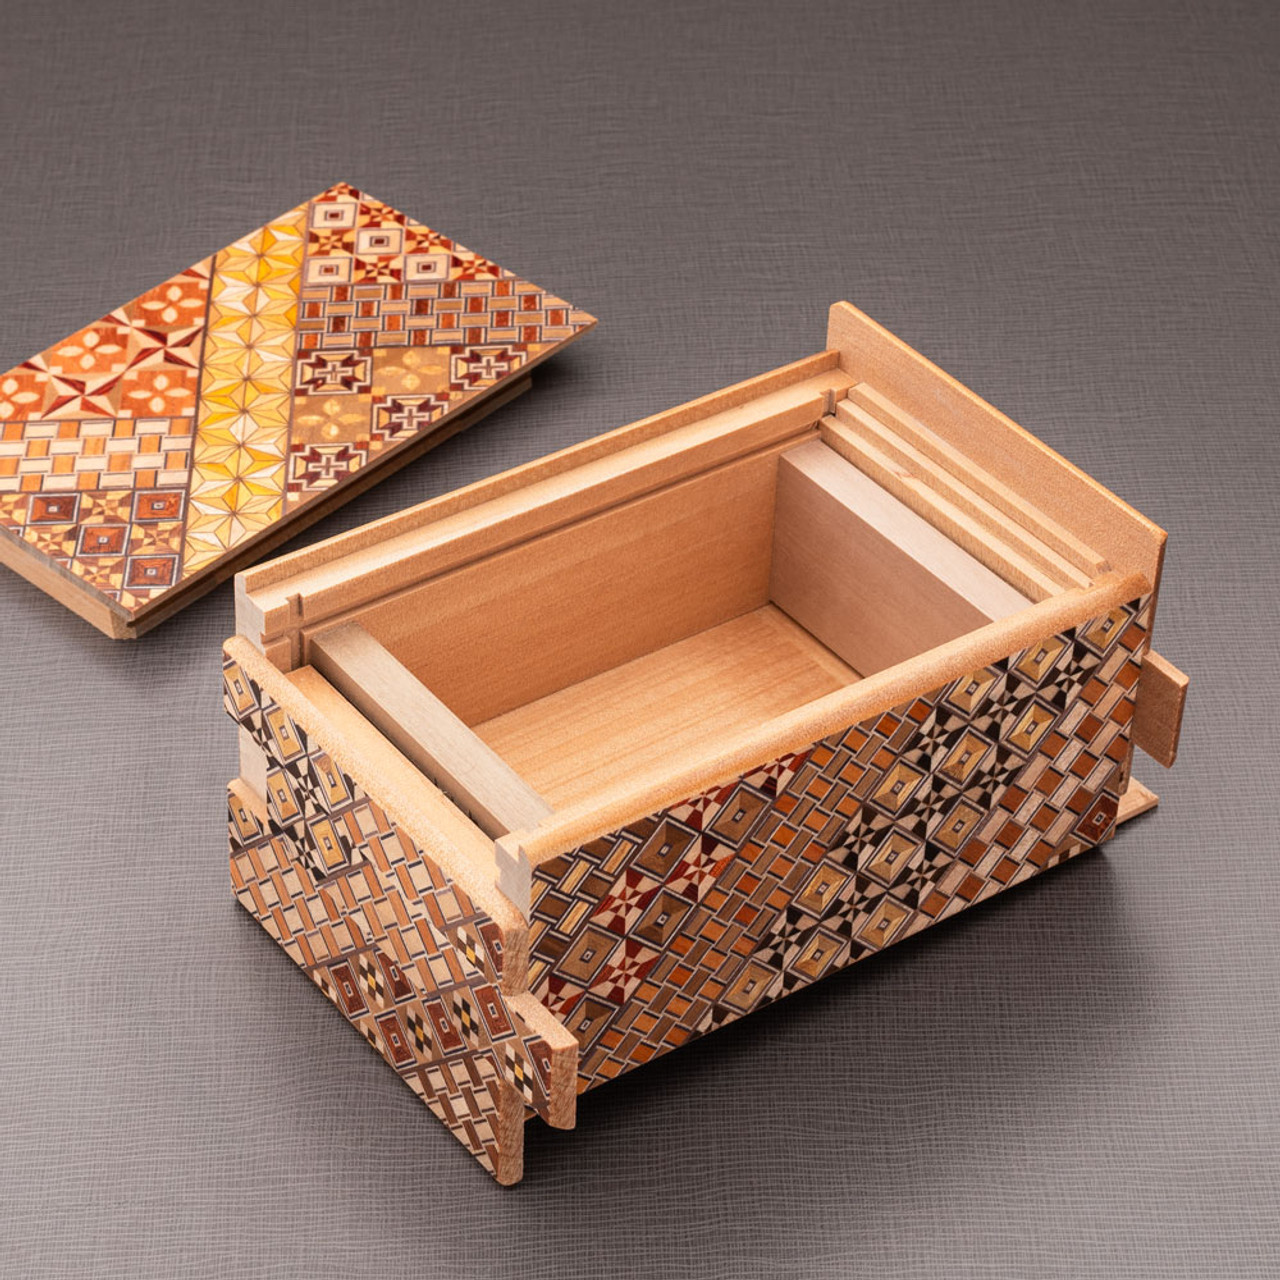 21-Step Secret Puzzle Box Made in Japan